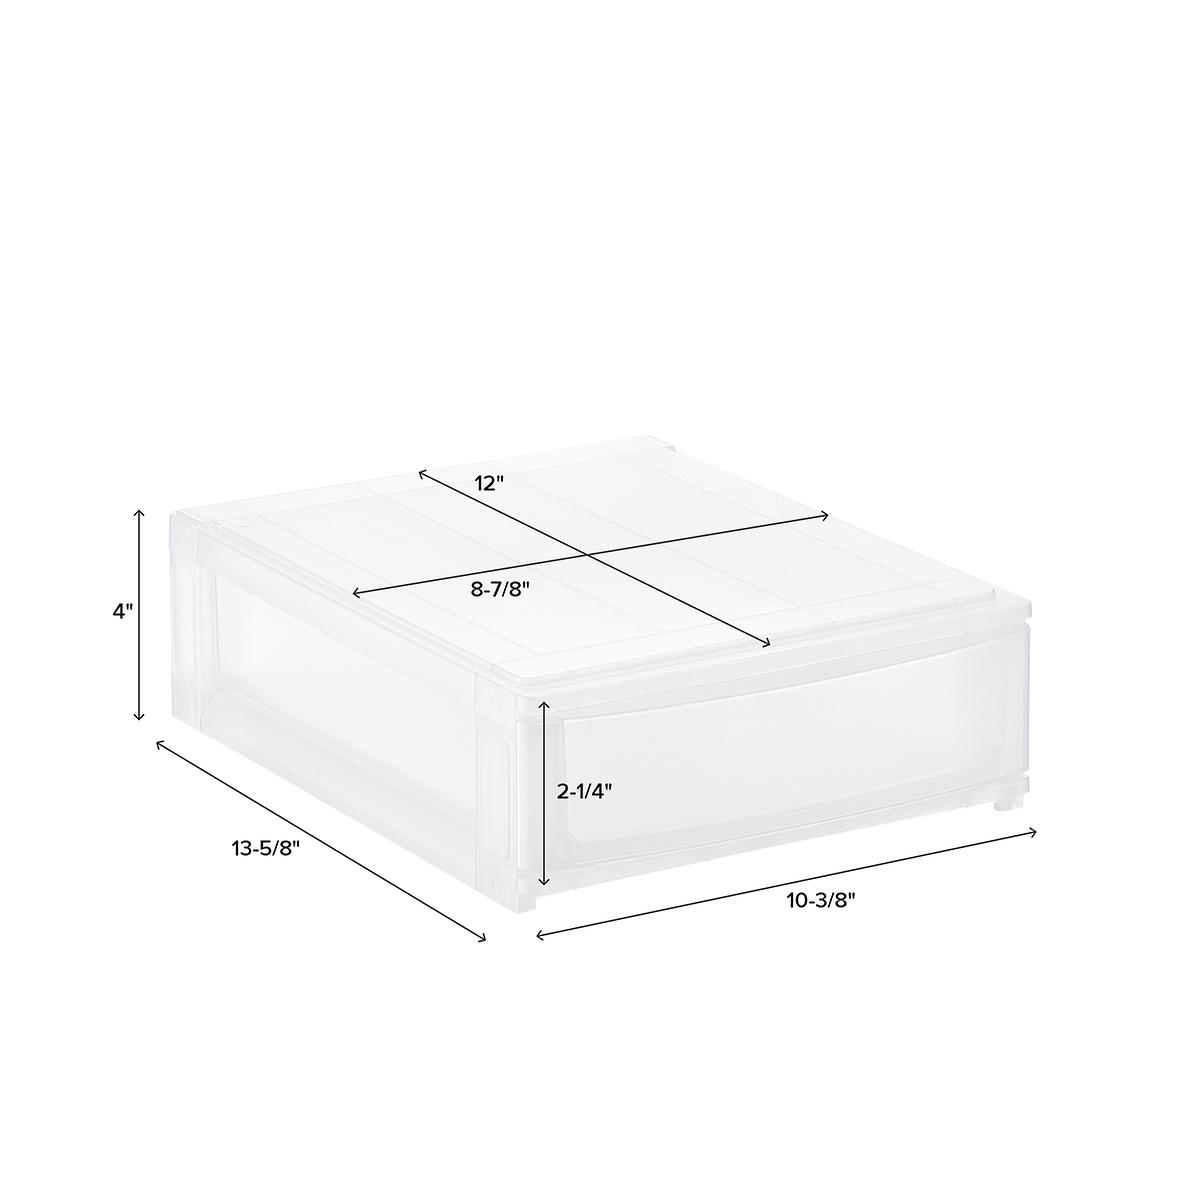 Shimo Letter-Size Stacking Paper Drawer | The Container Store